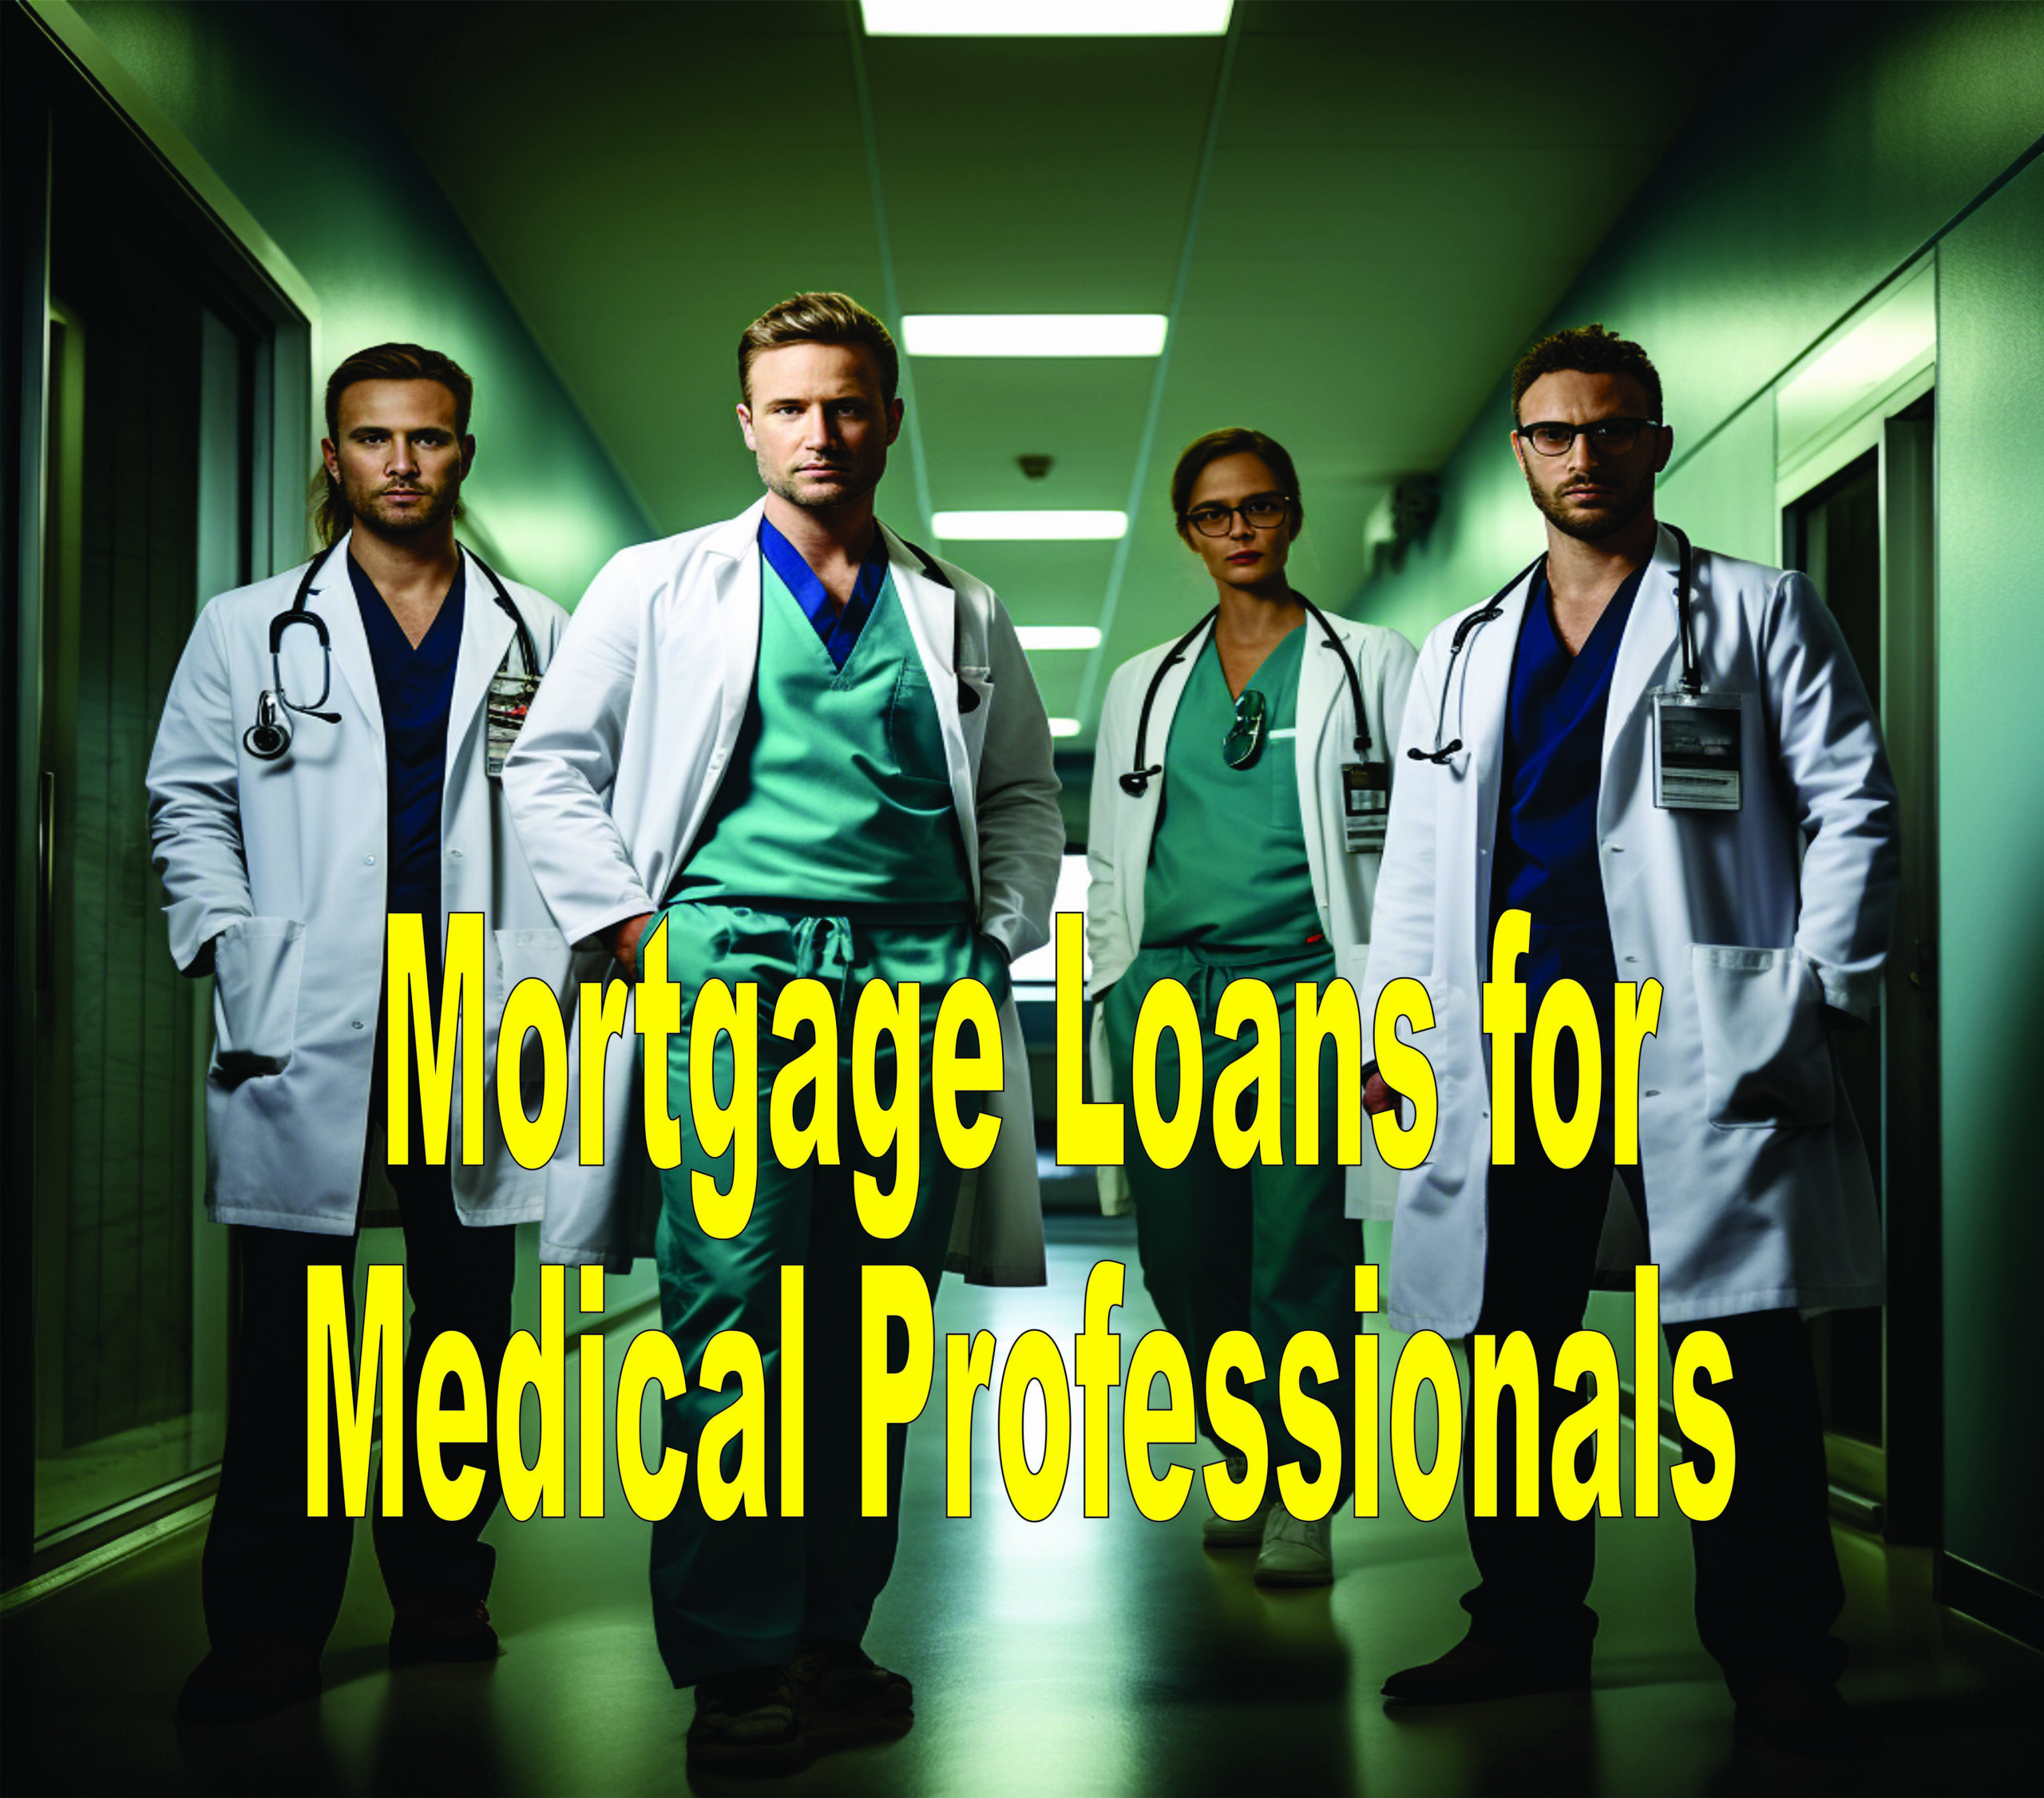 Mortgage Loans For Medical Professionals